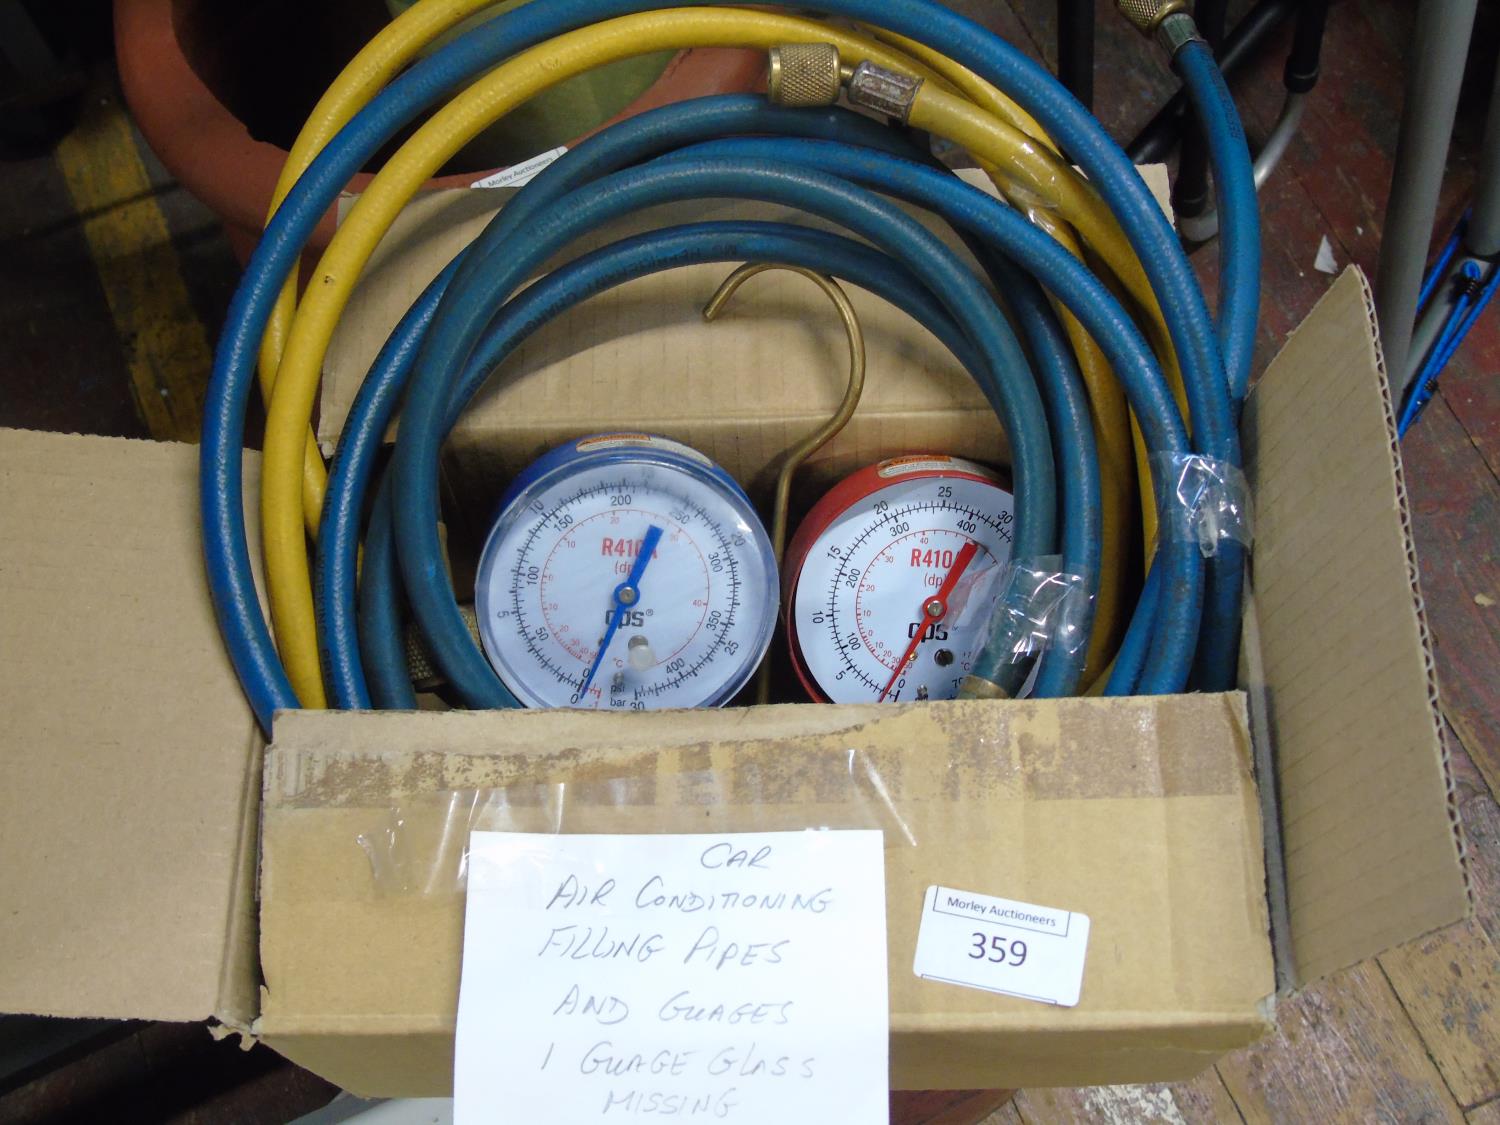 A set of car air conditioning hoses & gauges (one gauge has glass missing)